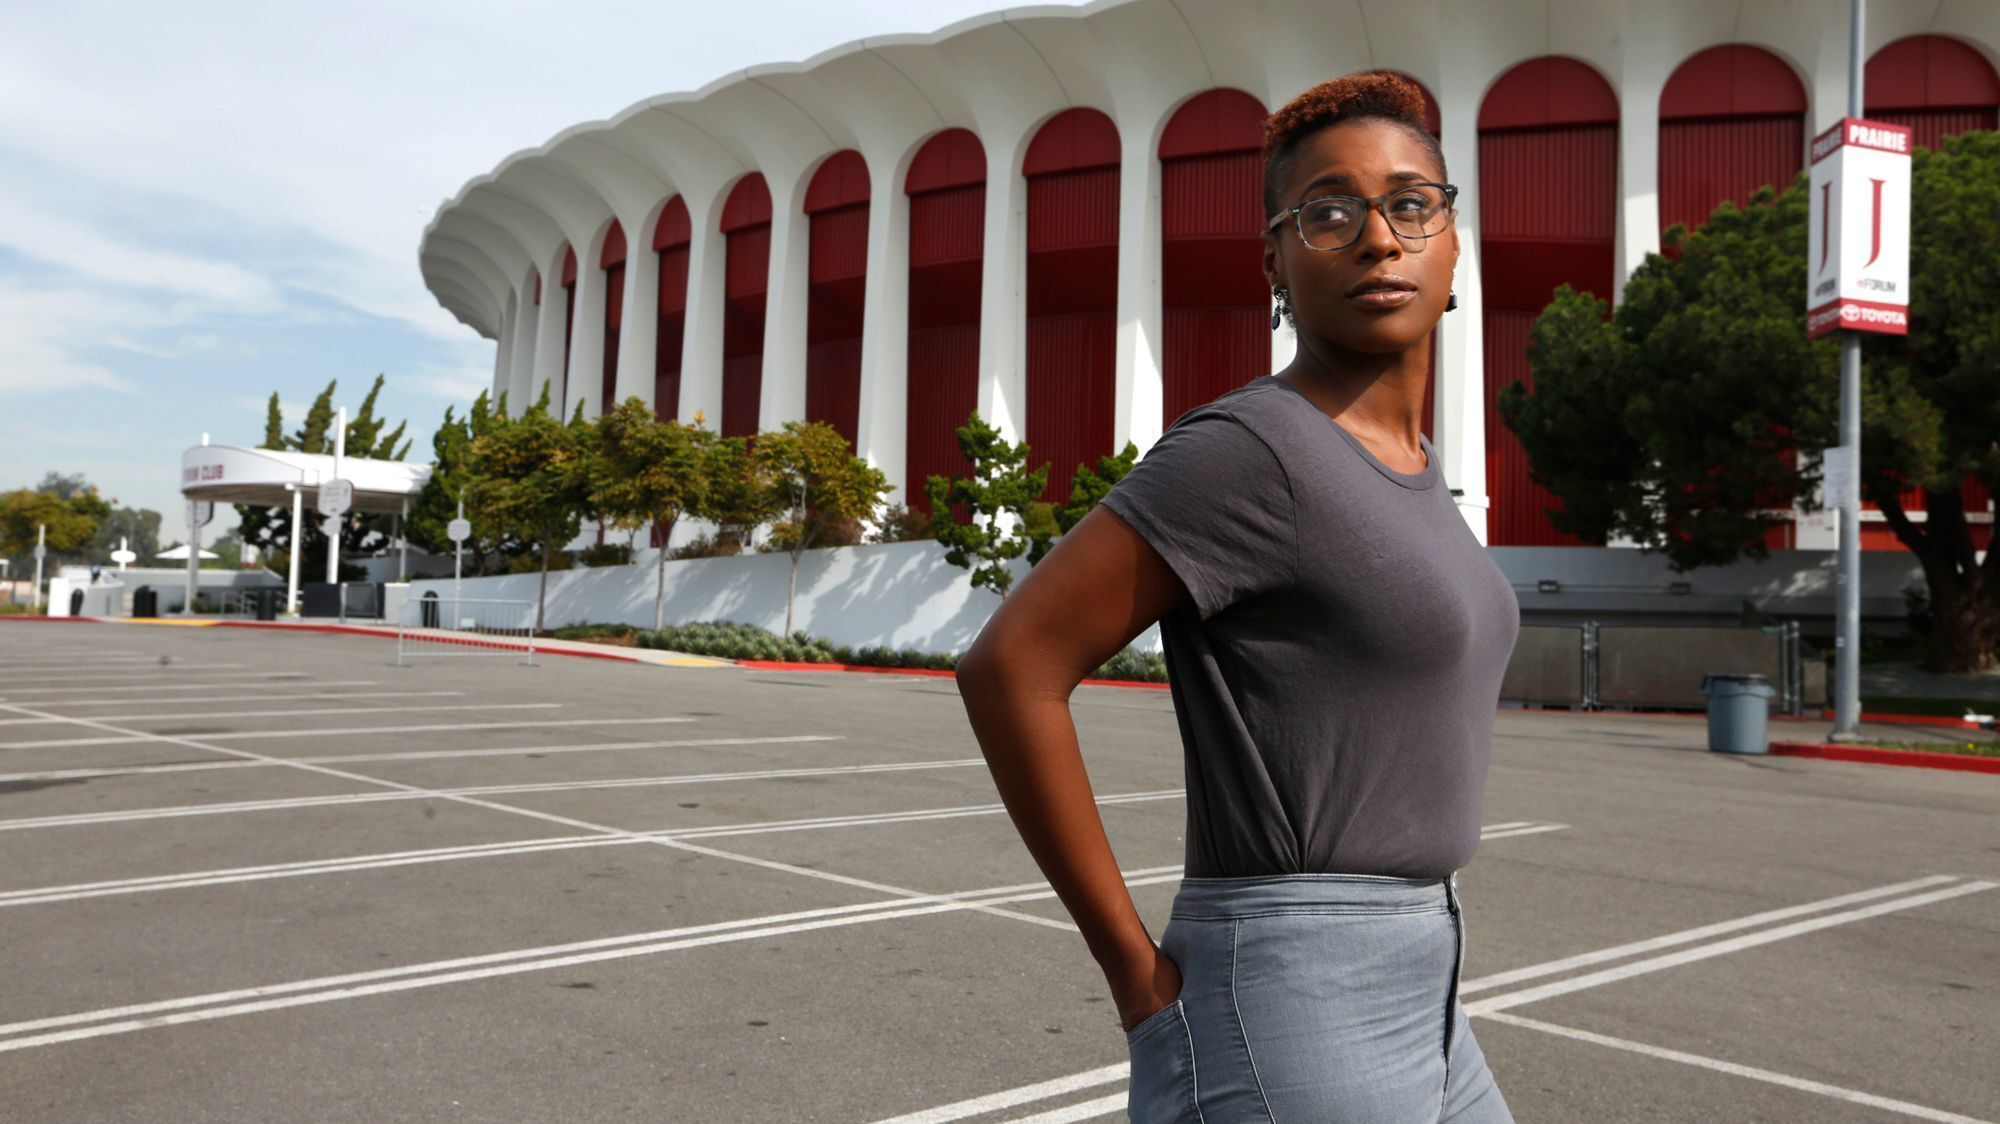 Issa Rae, creator and star of HBO's "Insecure," series walks through the parking lot of The Forum in Inglewood.